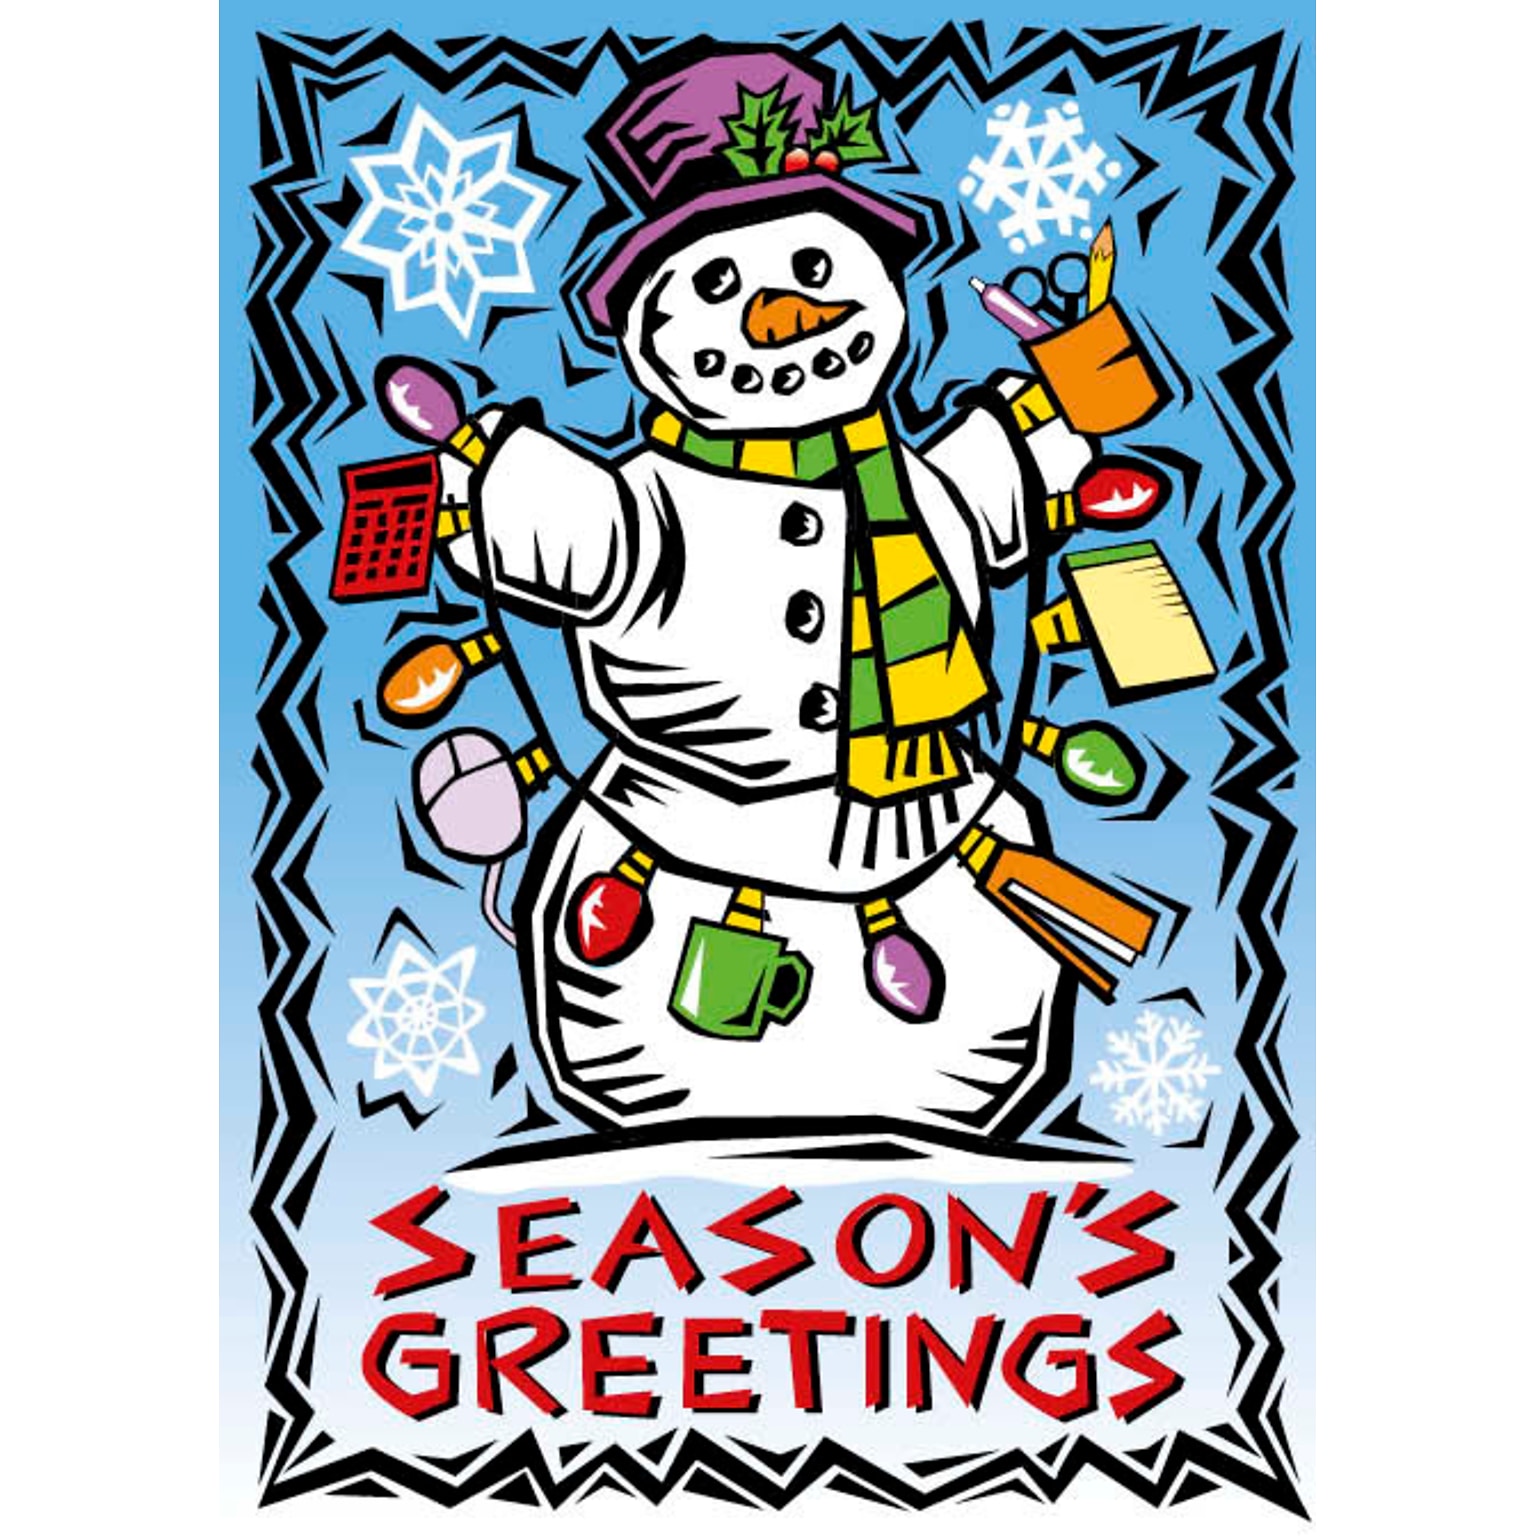 Seasons Greetings Snowman And Office Supplies Holiday Greeting Cards, With A7 Envelopes, 7 x 5, 25 Cards per Set